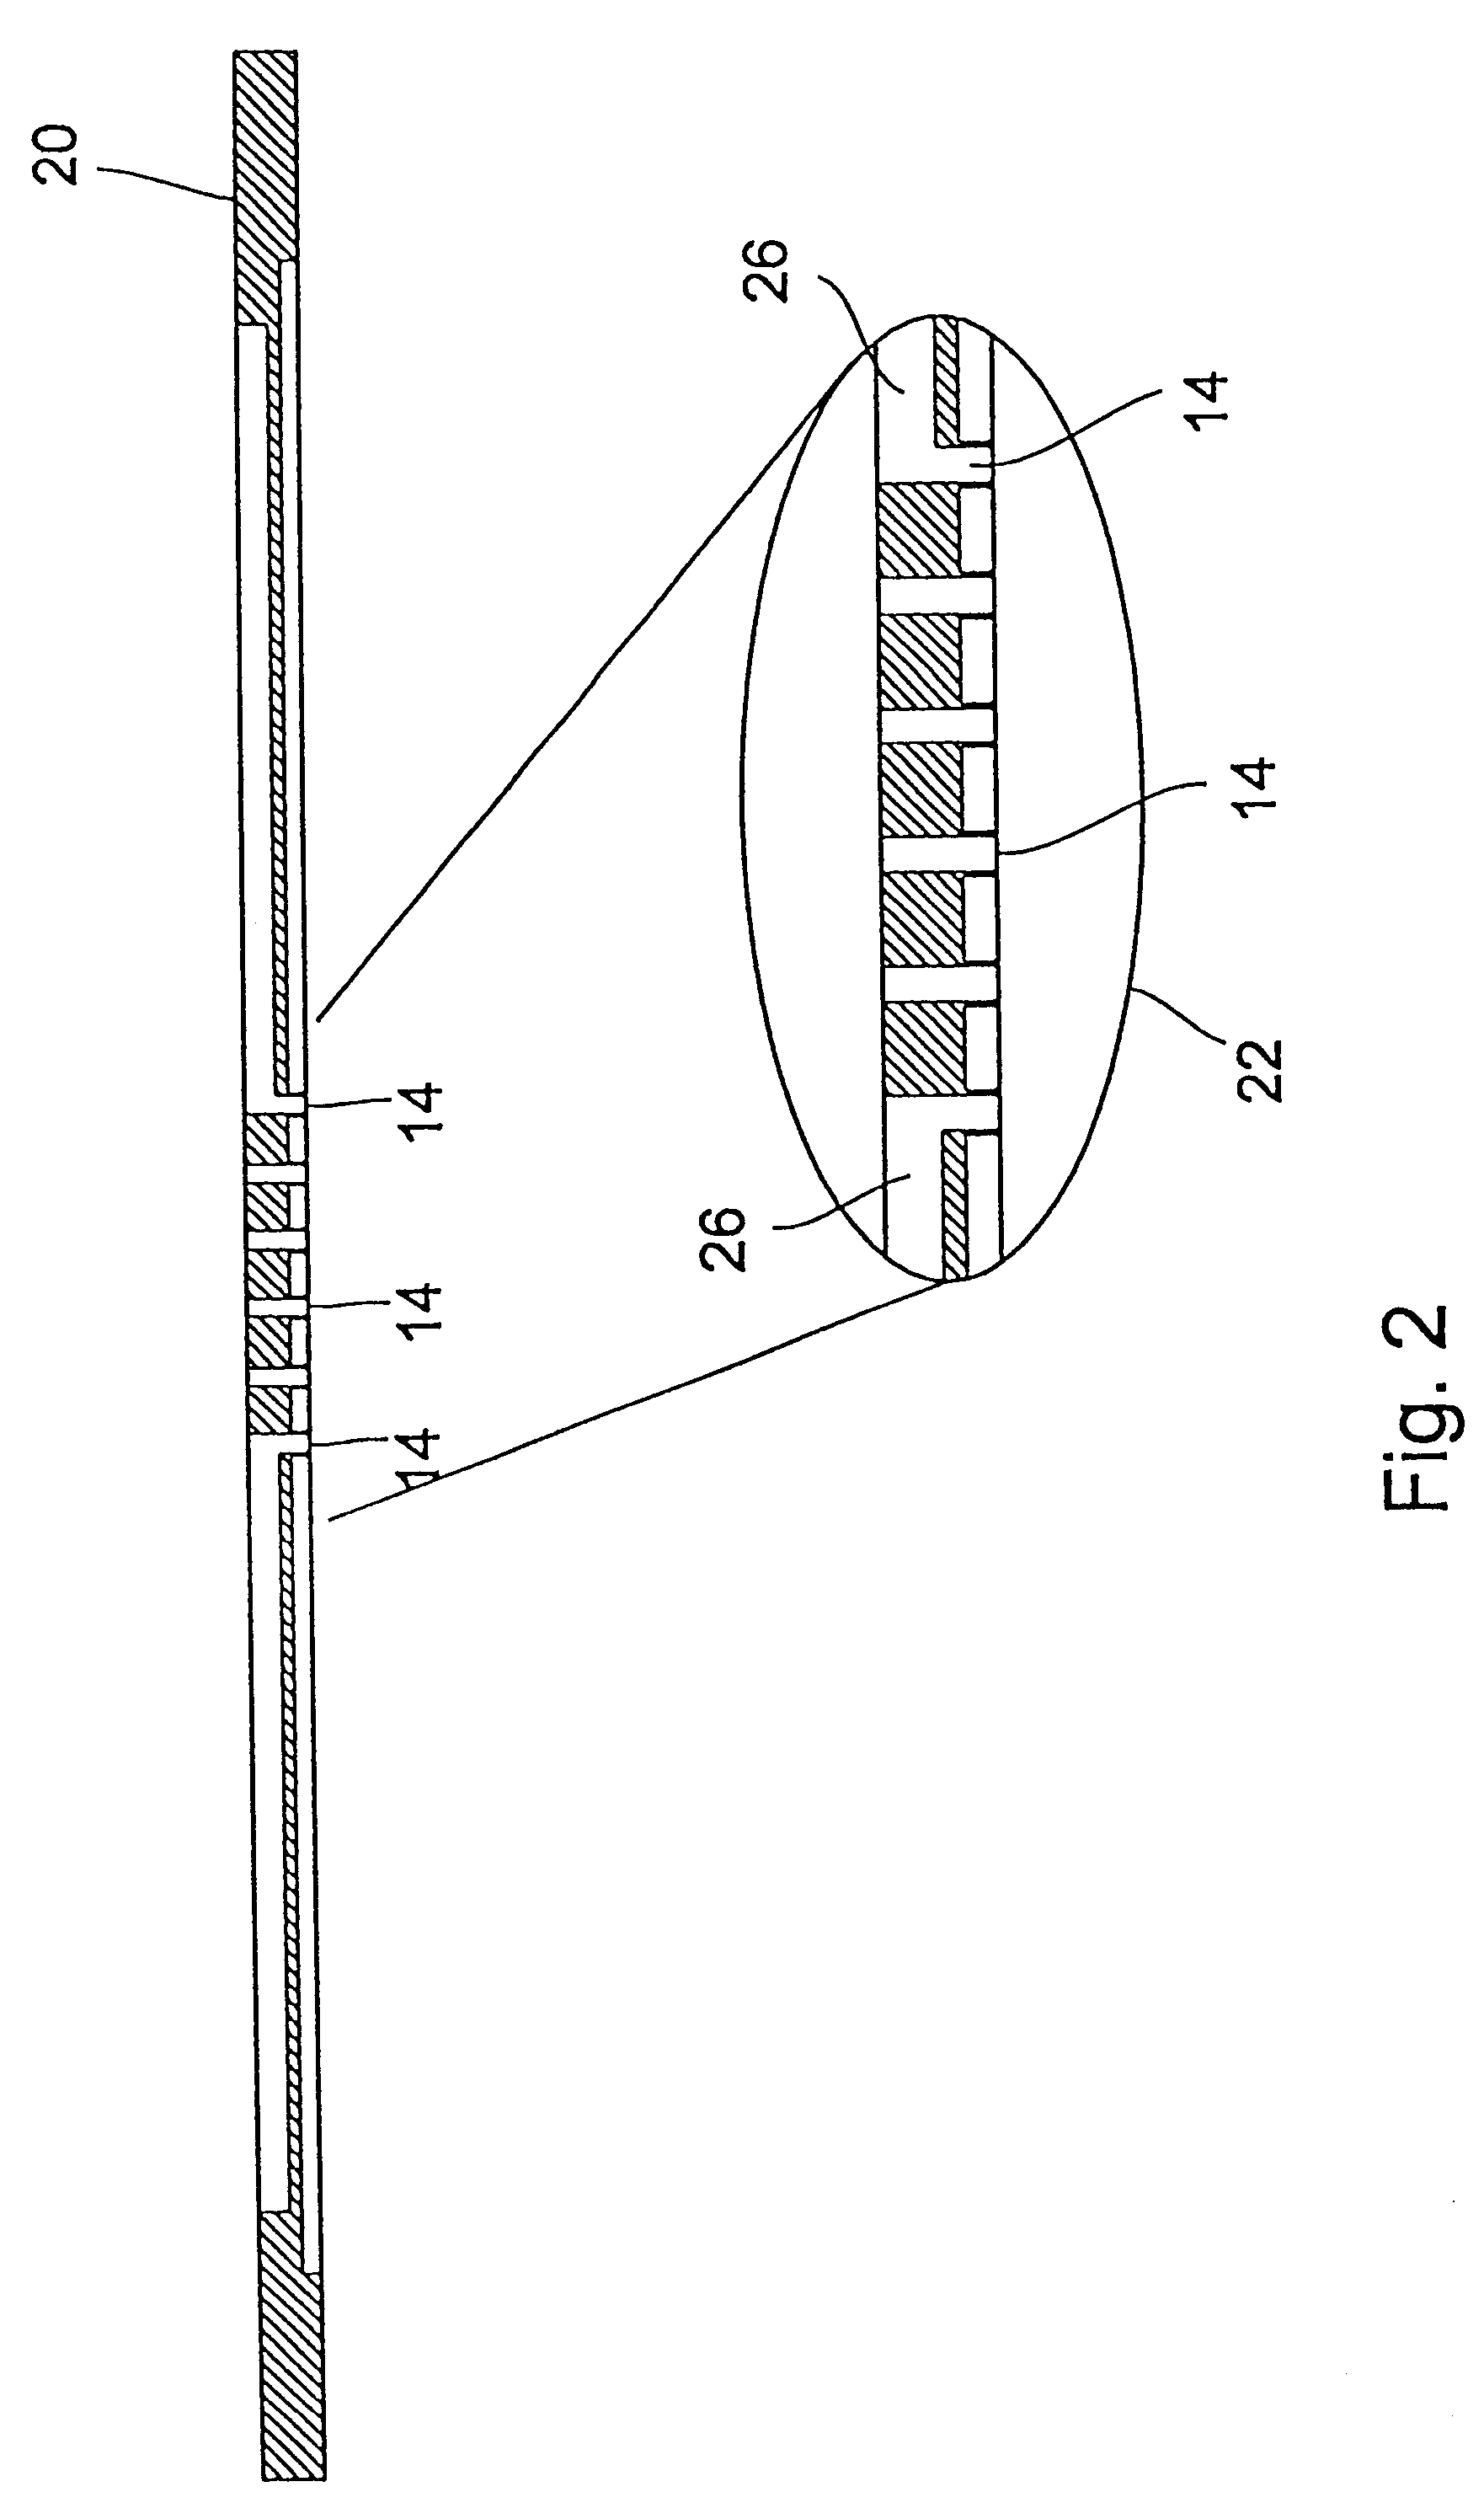 Device and method of applying microdroplets to a substrate